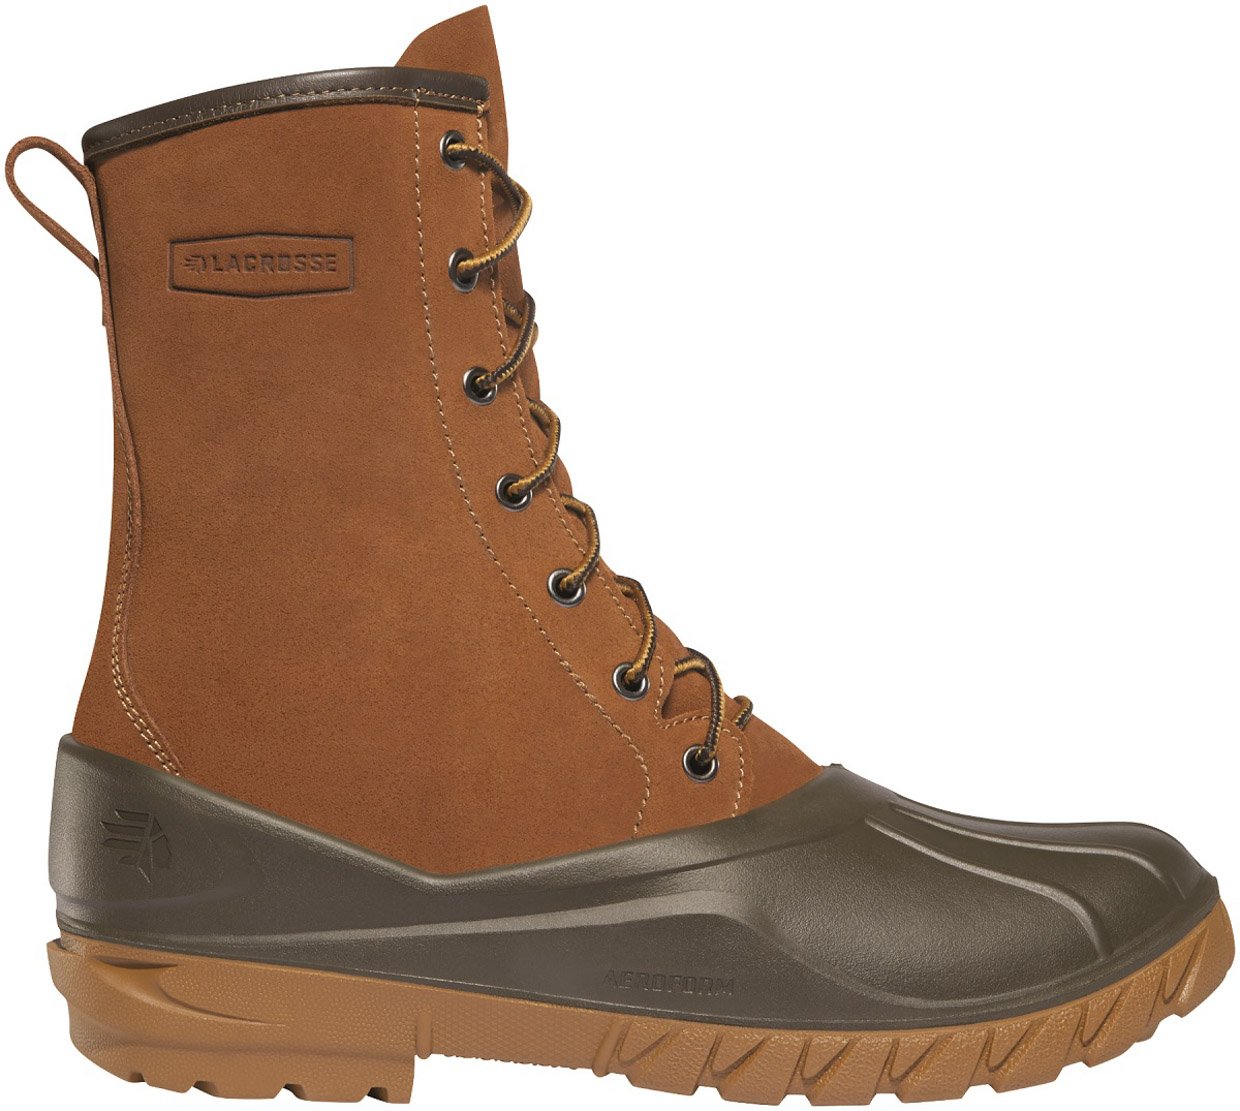 LaCrosse Aero Timber Top Duck Boots